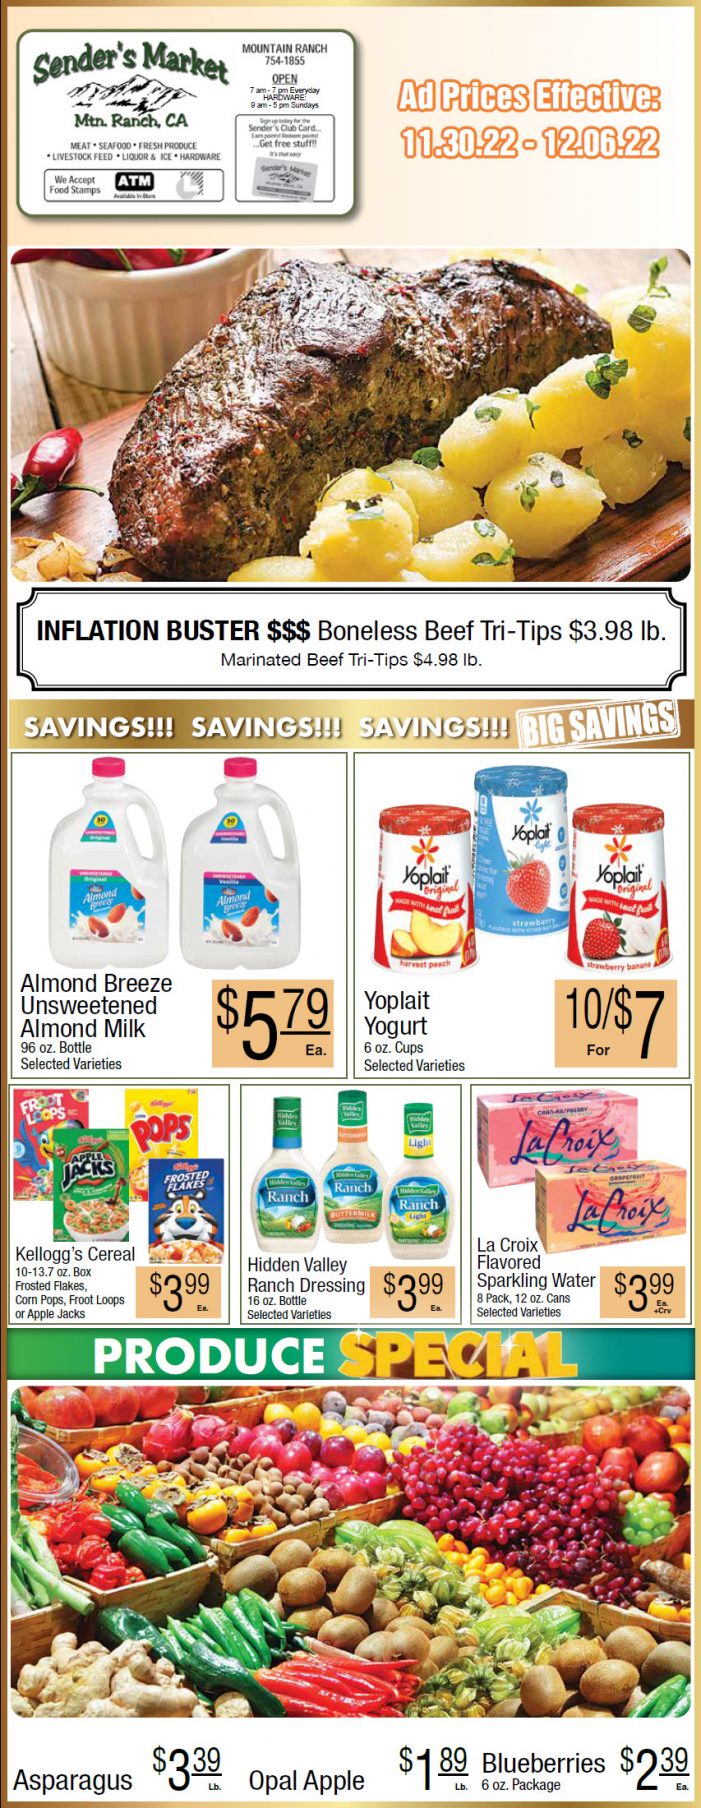 Sender’s Market Weekly Ad & Grocery Specials November 30 ~ December 6th! Shop Local & Save!